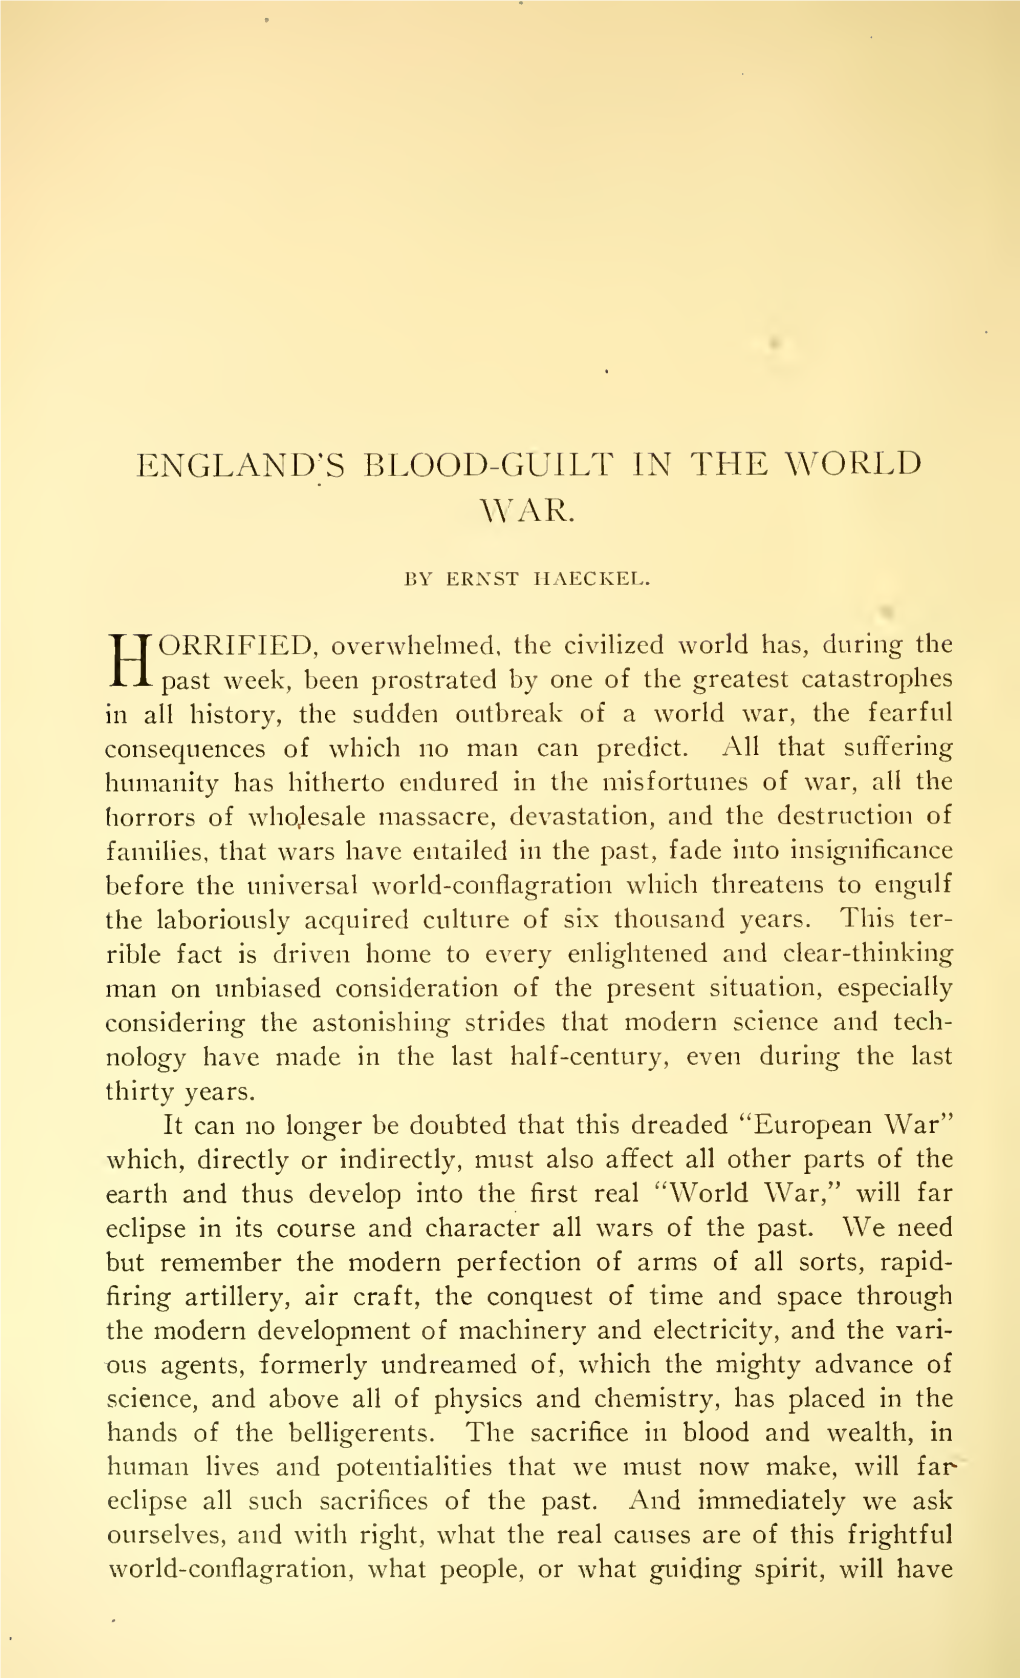 England's Blood-Guilt in the World War